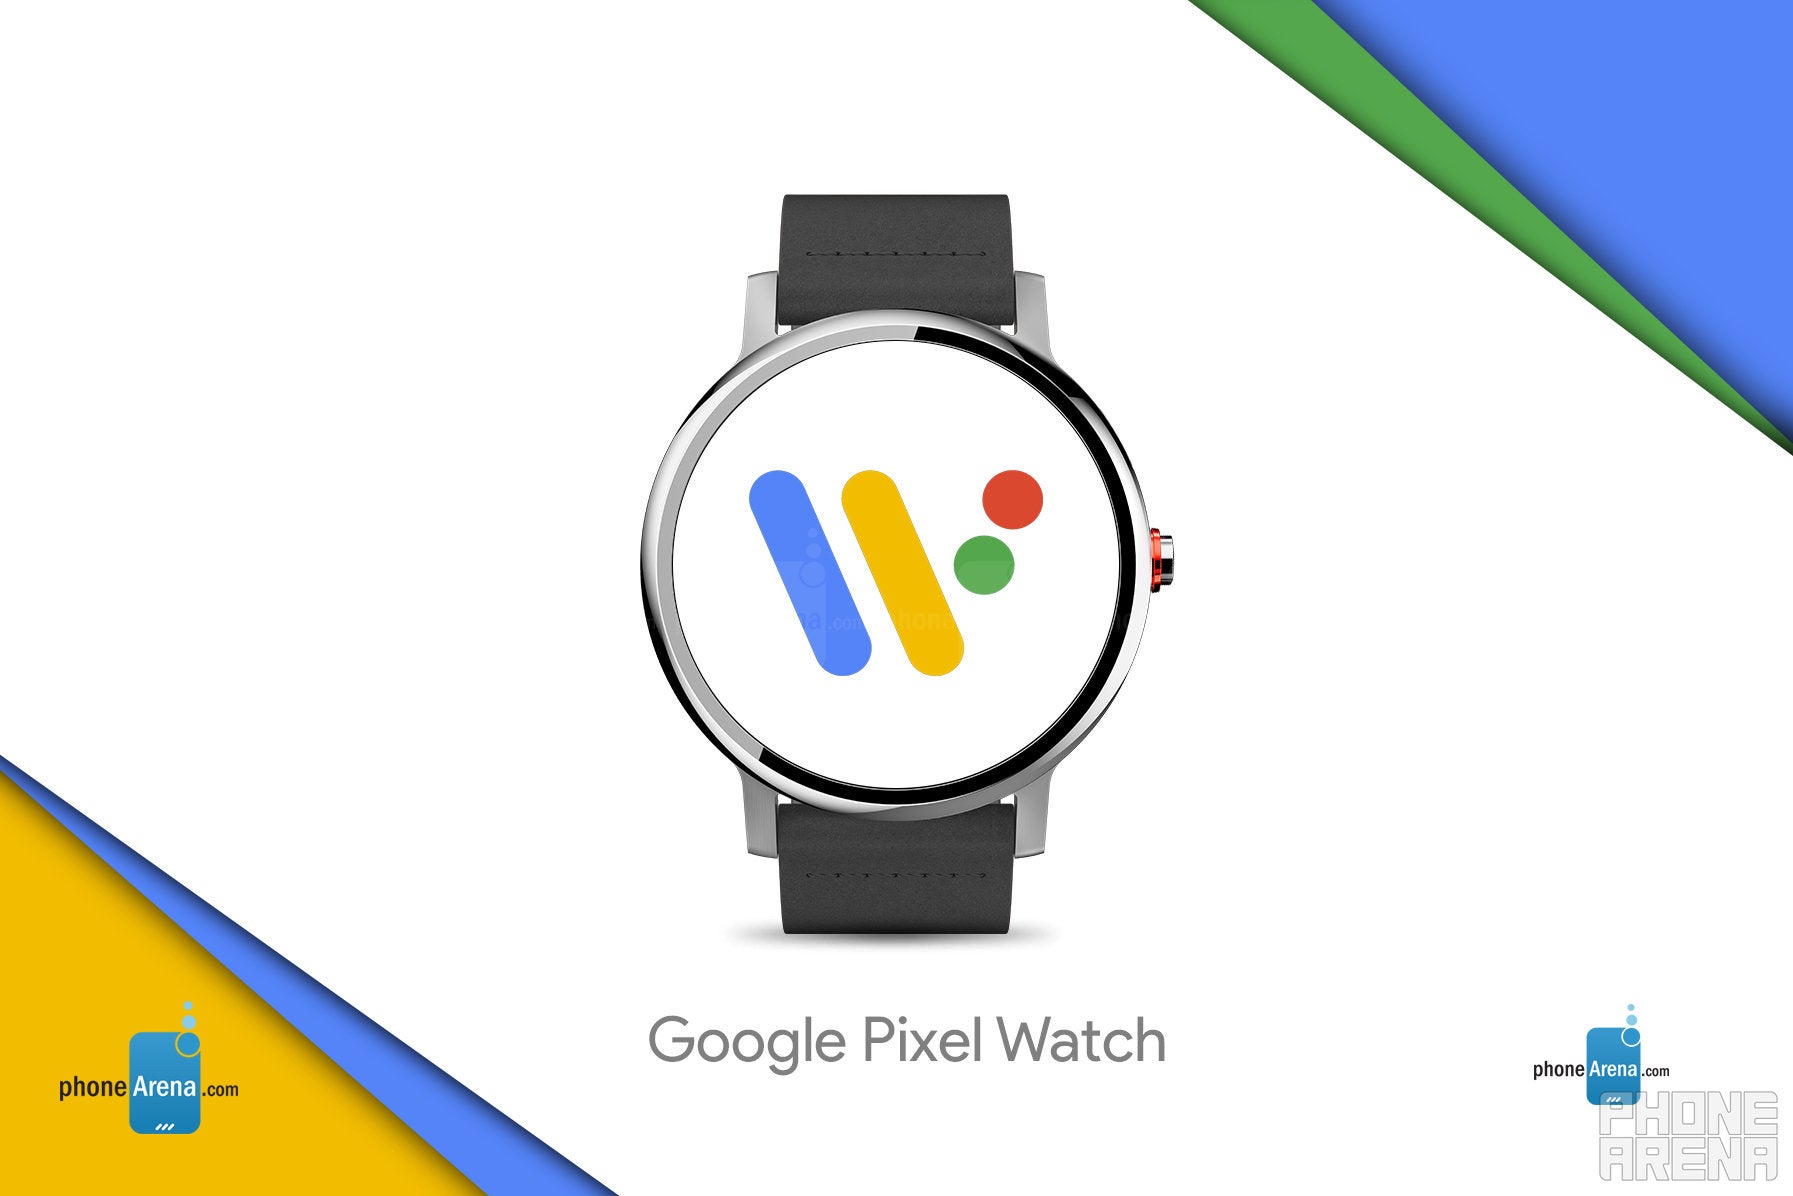 With the Pixel Watch closer to release, Google is enforcing new Wear OS app quality guidelines